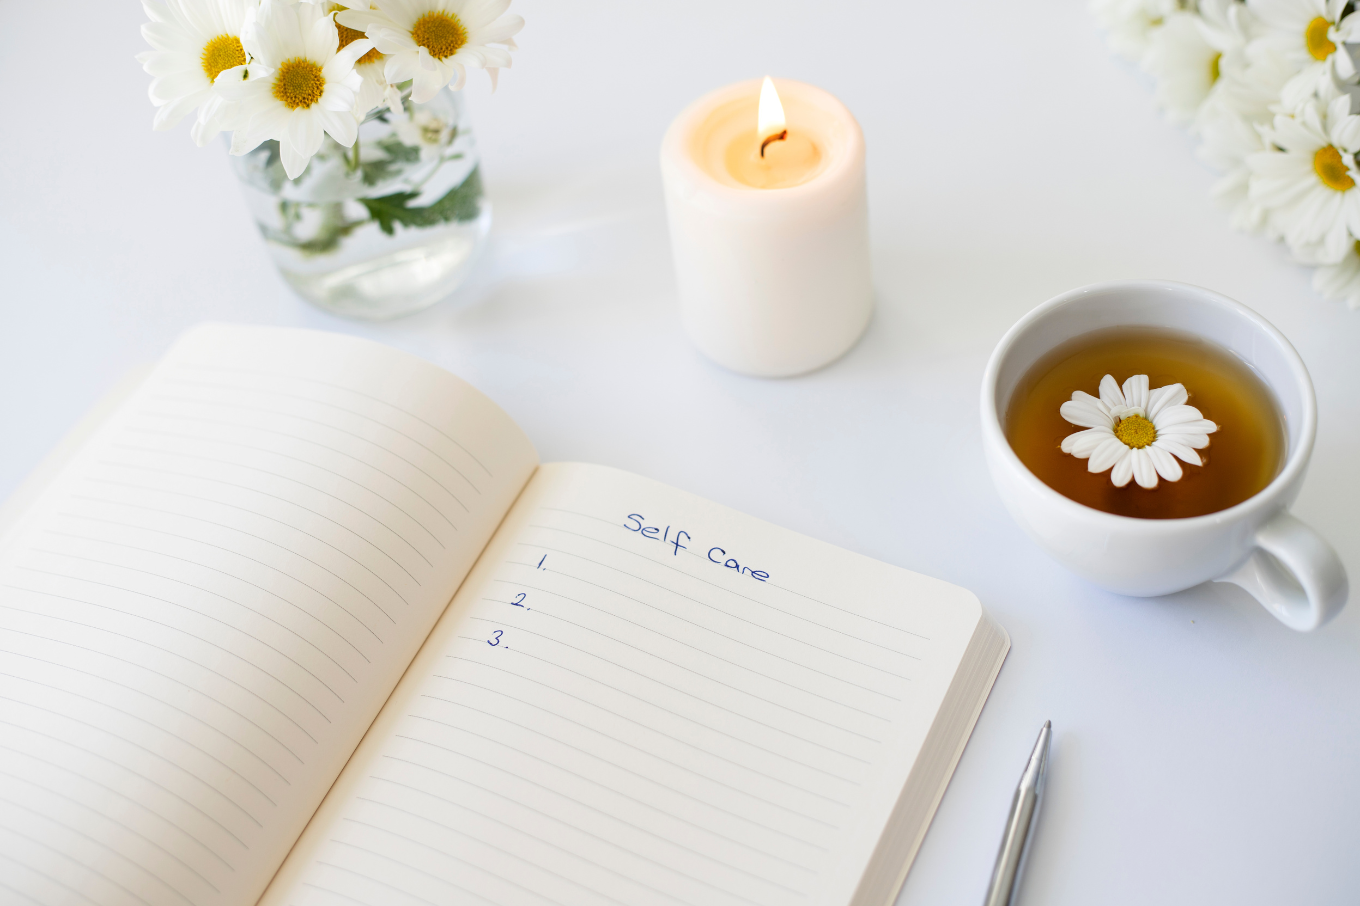 Close up of handwritten text "Self Care" in foreground with notebook, pen, cup of tea, flowers